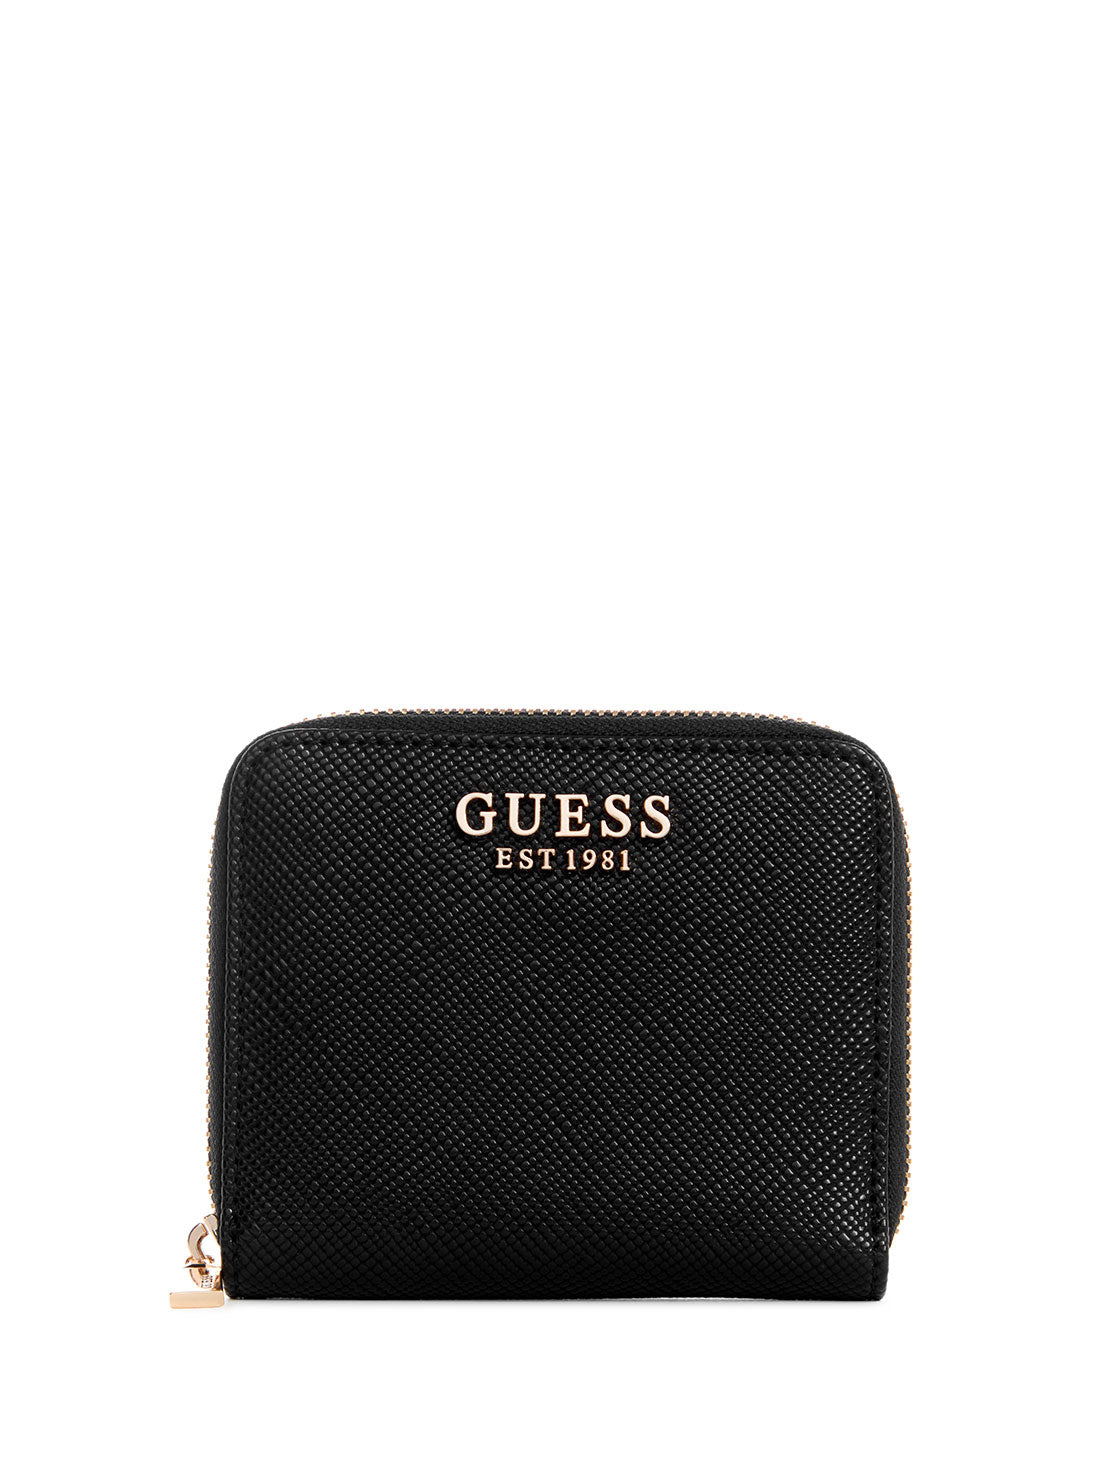 GUESS Black Laurel Small Wallet front view